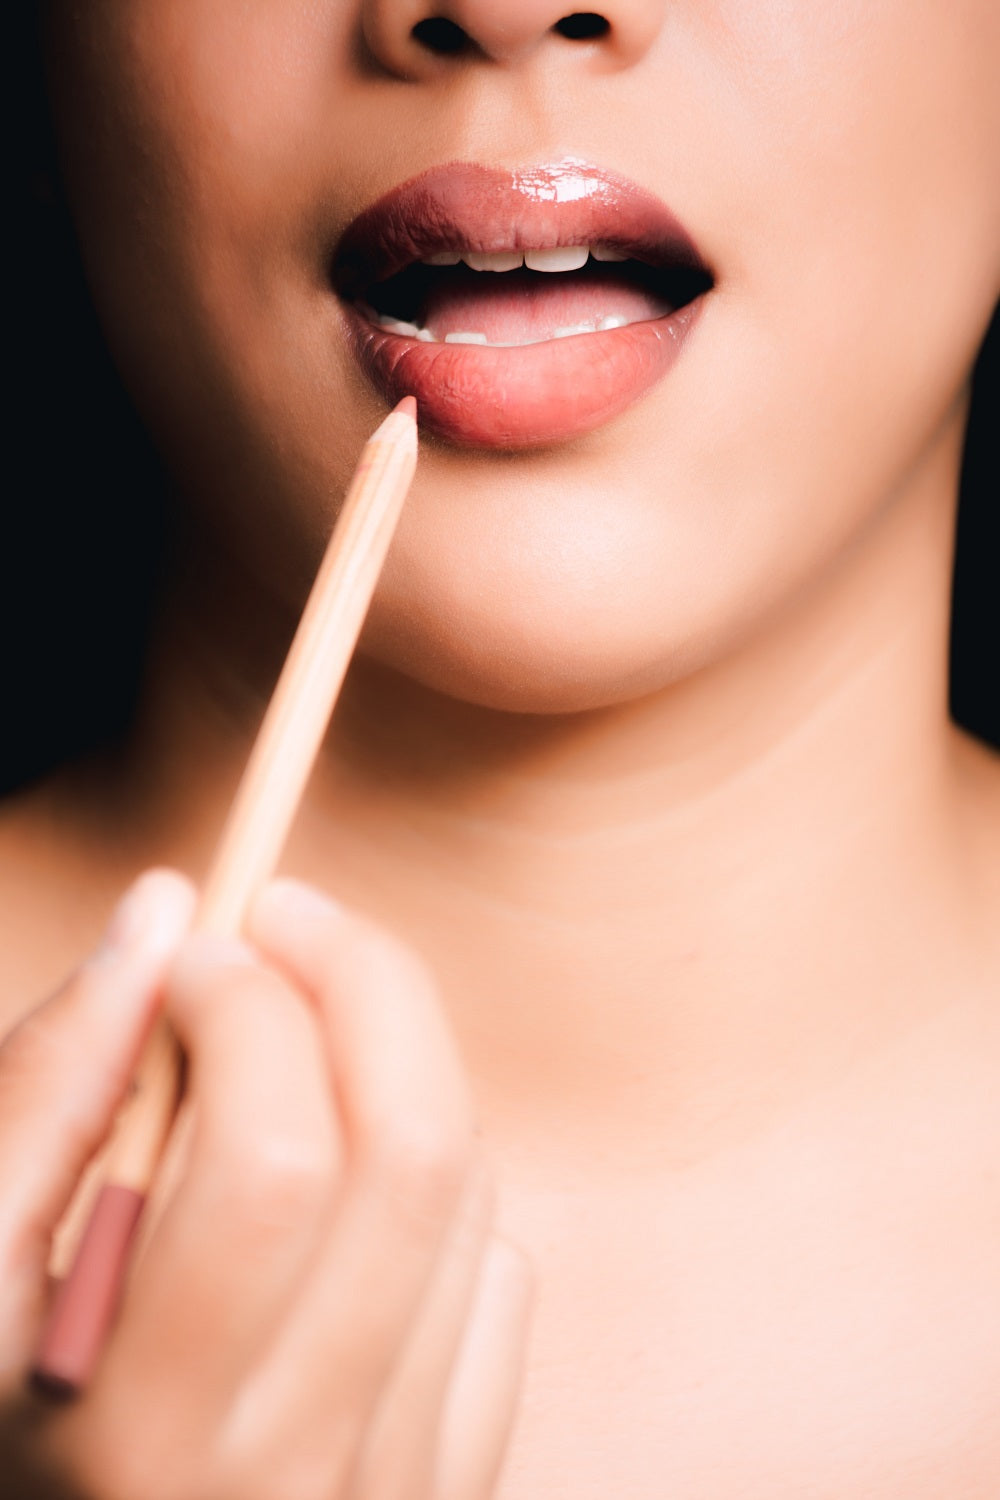 How to Make Your Lips Pop - Tips for Juicy, Plump Lips